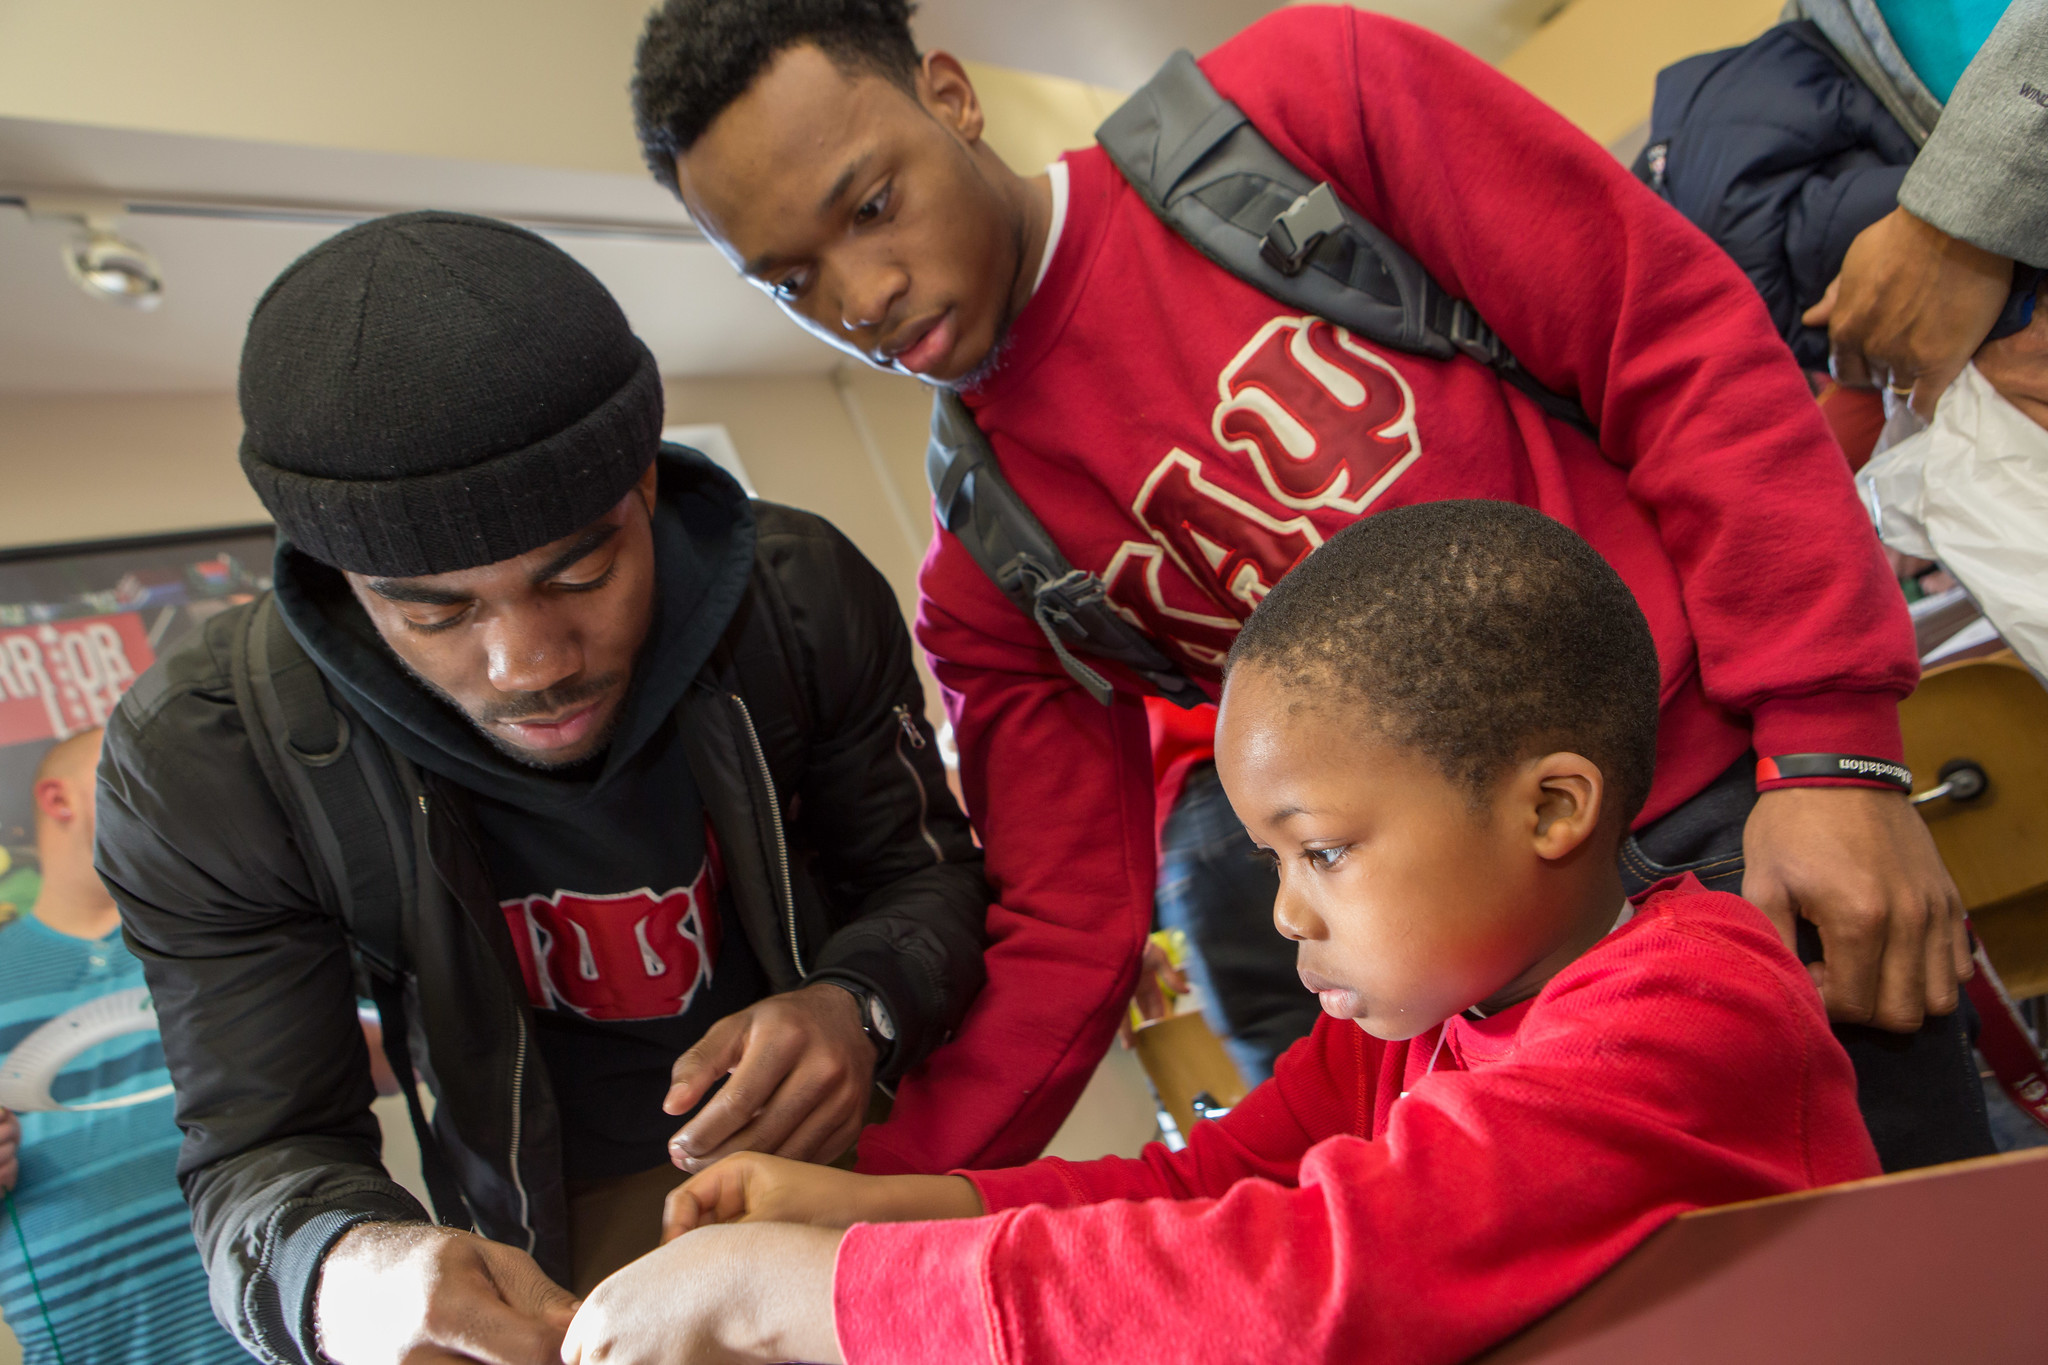 Two ESU fraternity students helping an young child